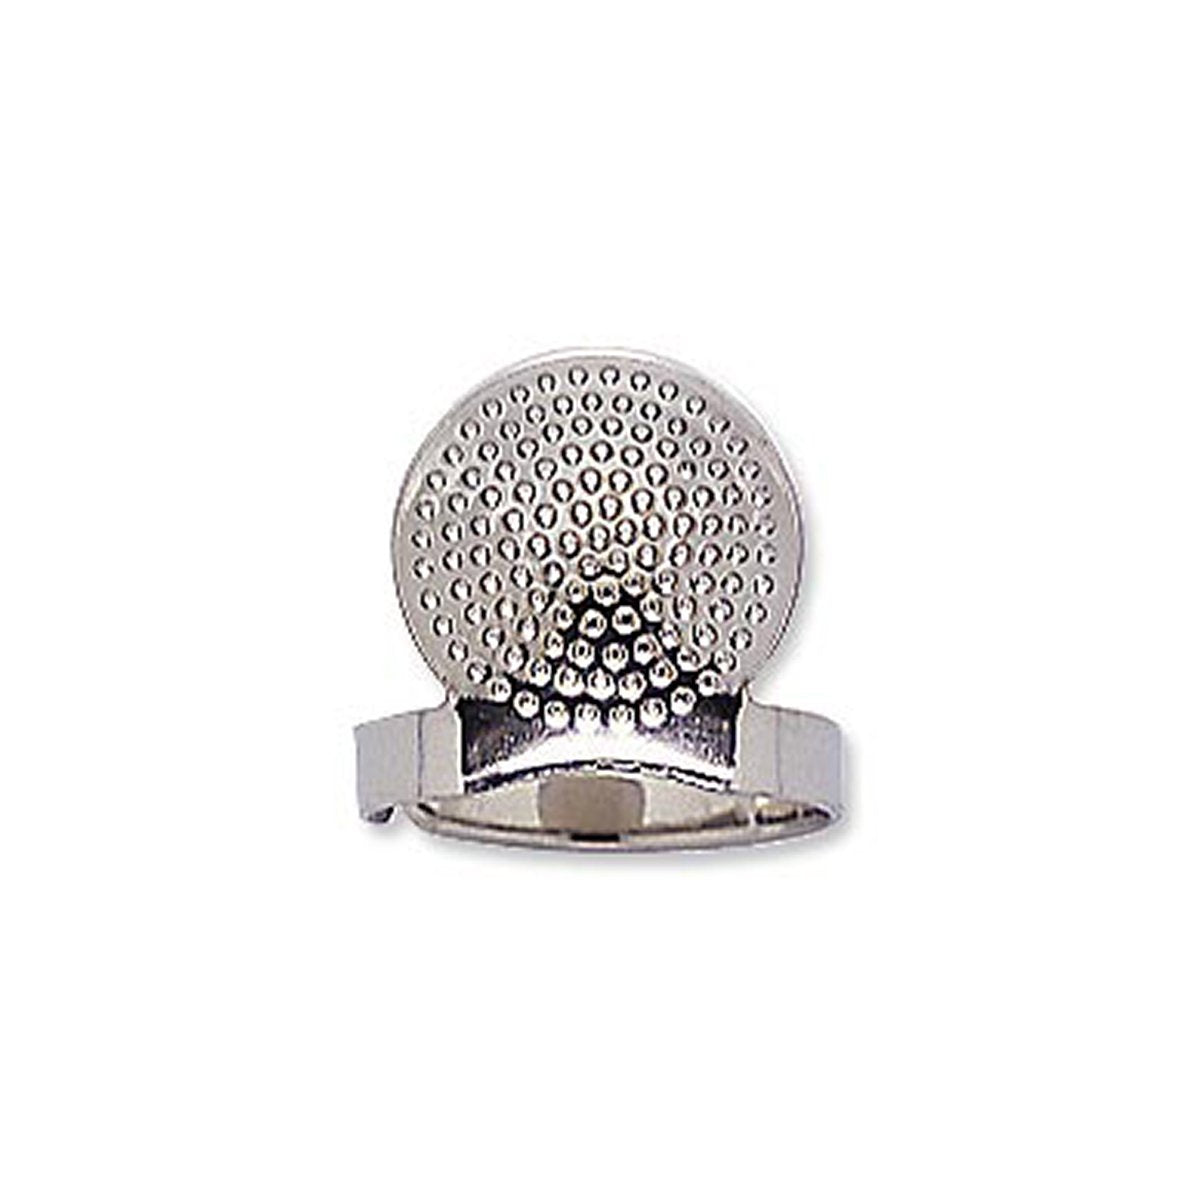 CLV - Adjustable Ring Thimble With Plate